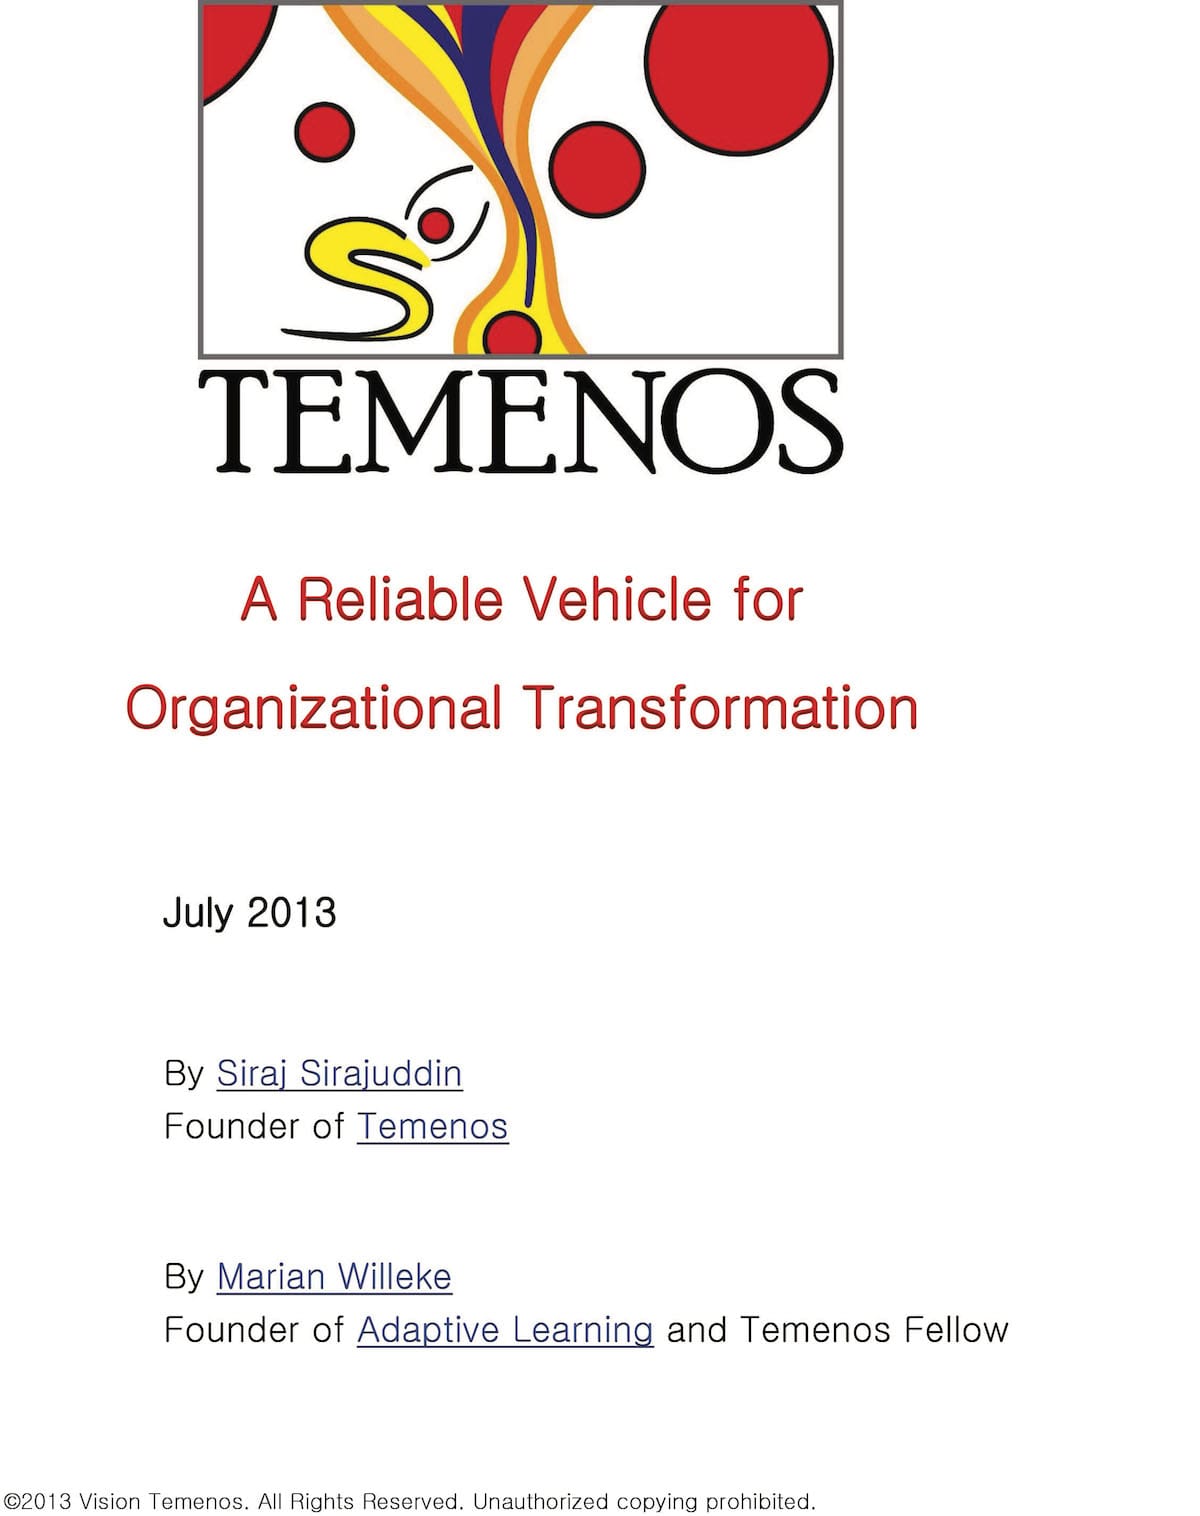 Temenos - A Reliable Vehicle for Organizational Transformation